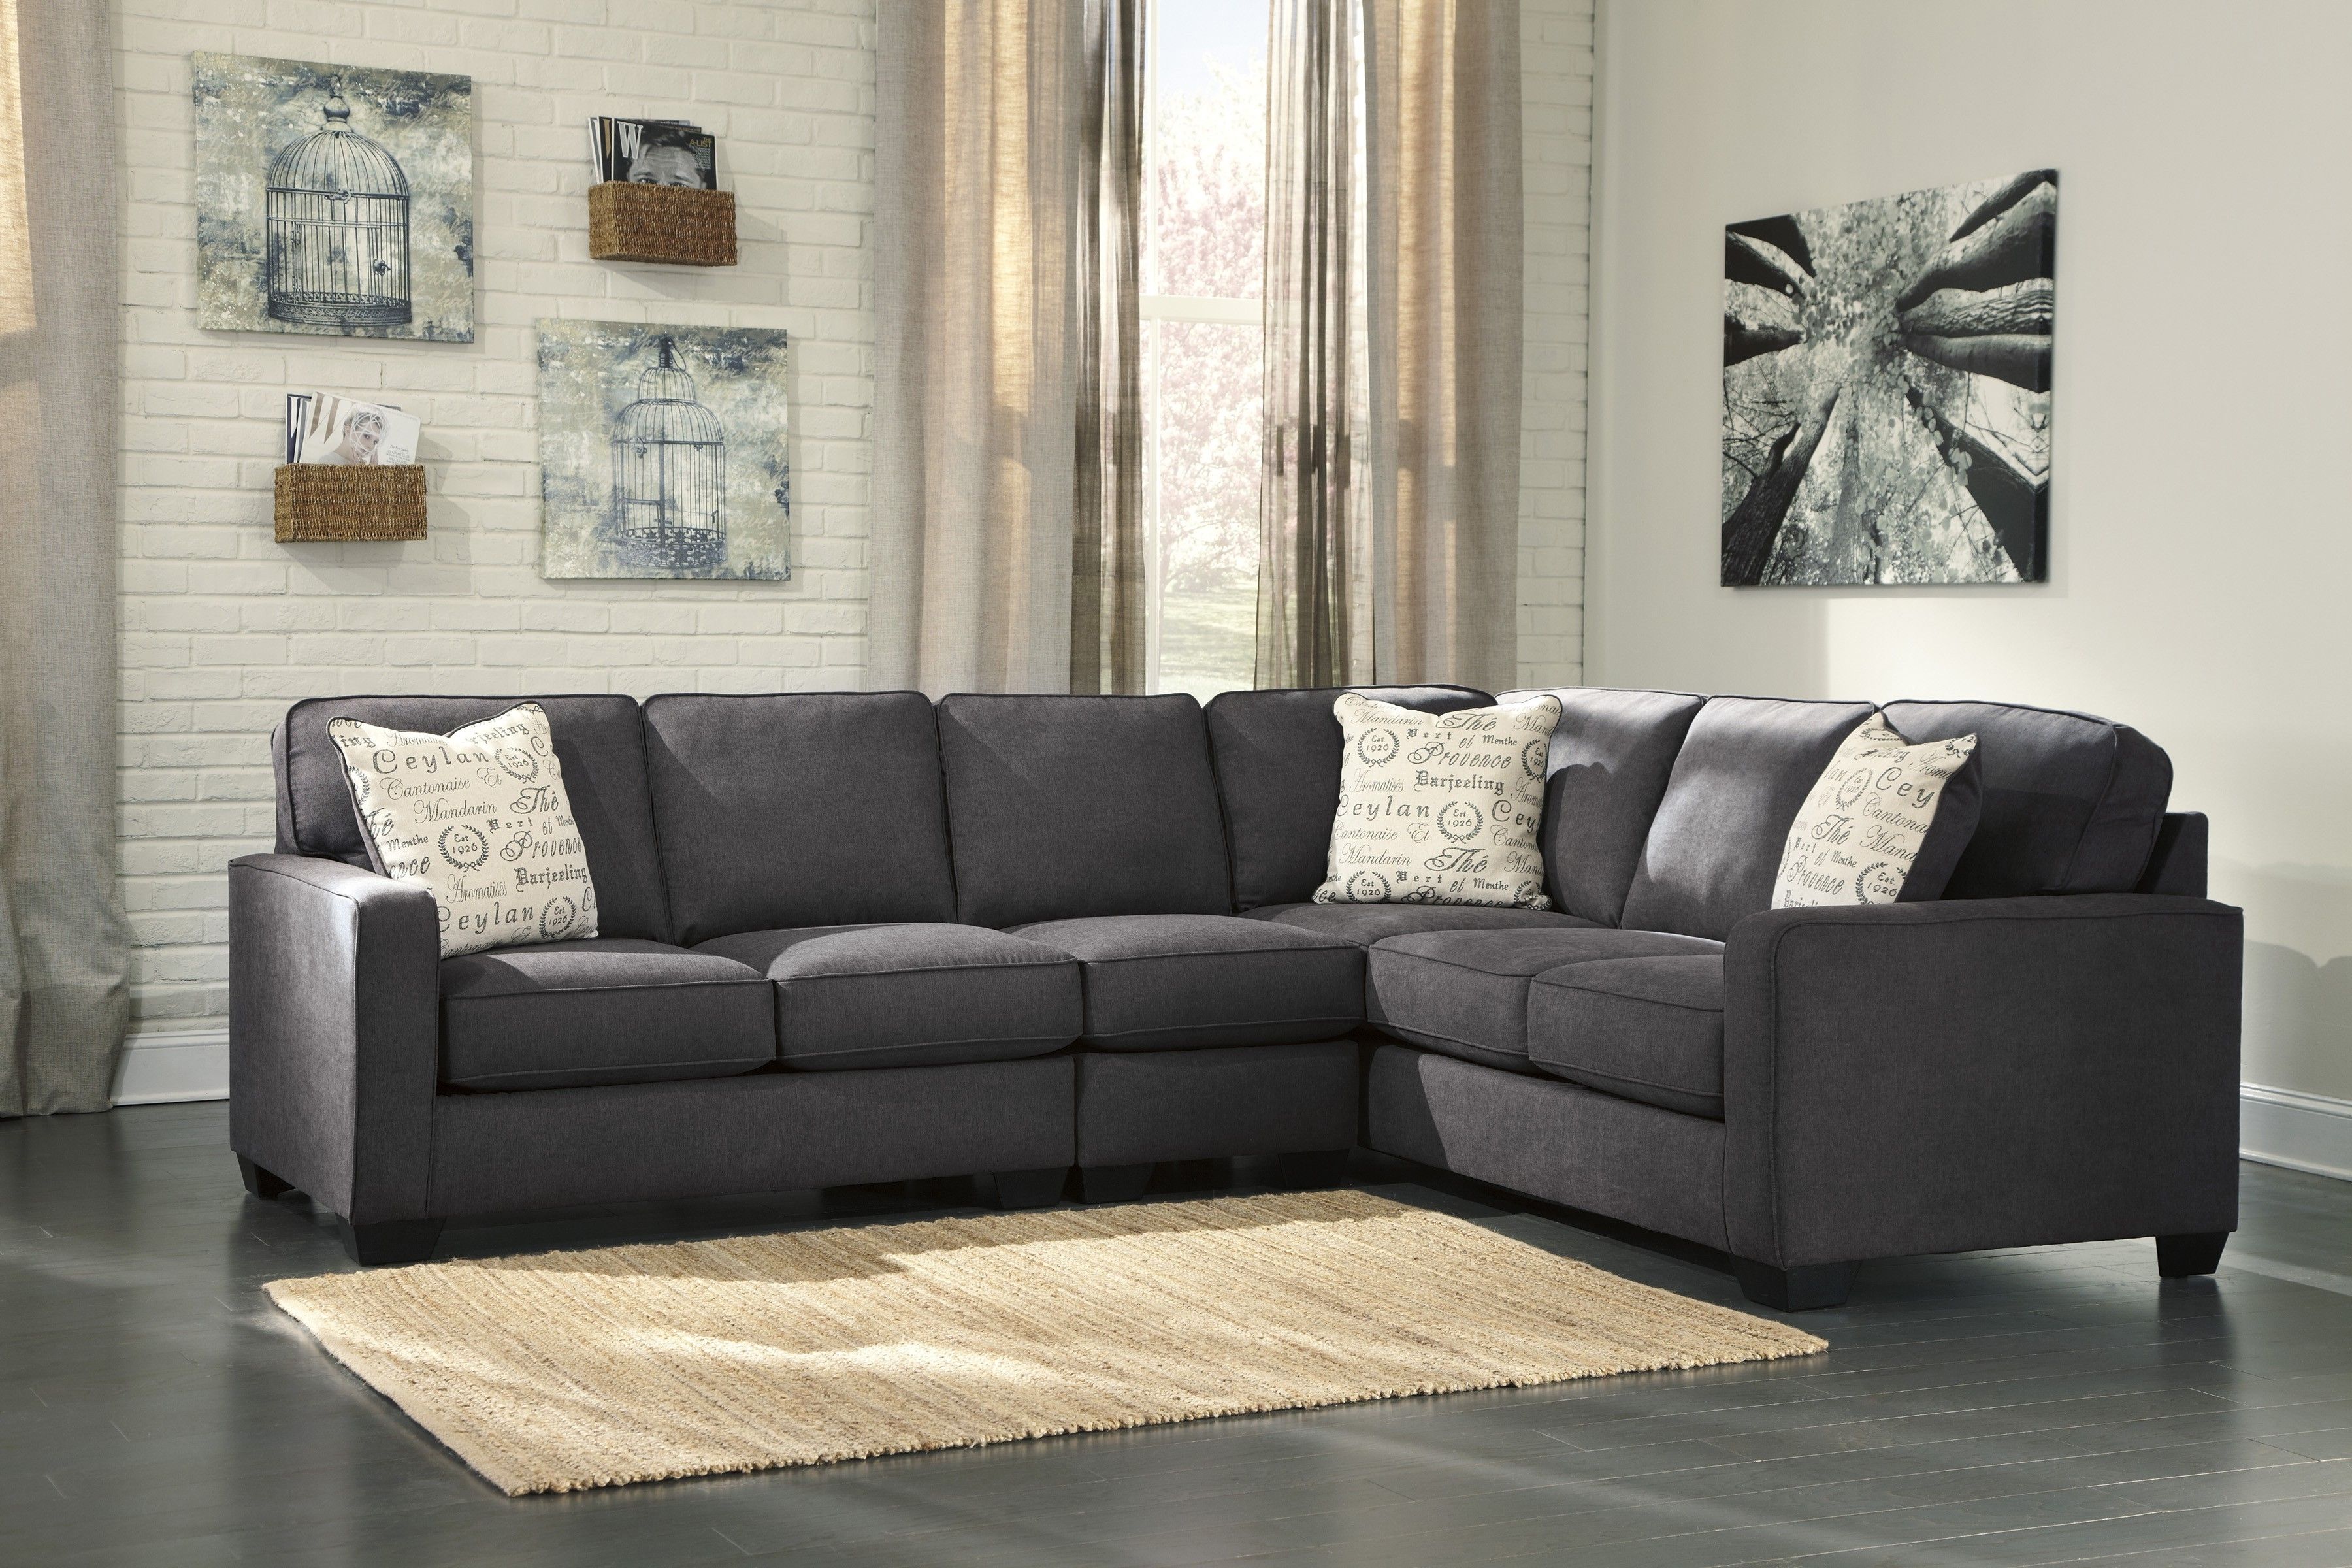 Recent Elk Grove Ca Sectional Sofas Regarding Alenya Charcoal 3 Piece Sectional Sofa For $ (View 4 of 15)